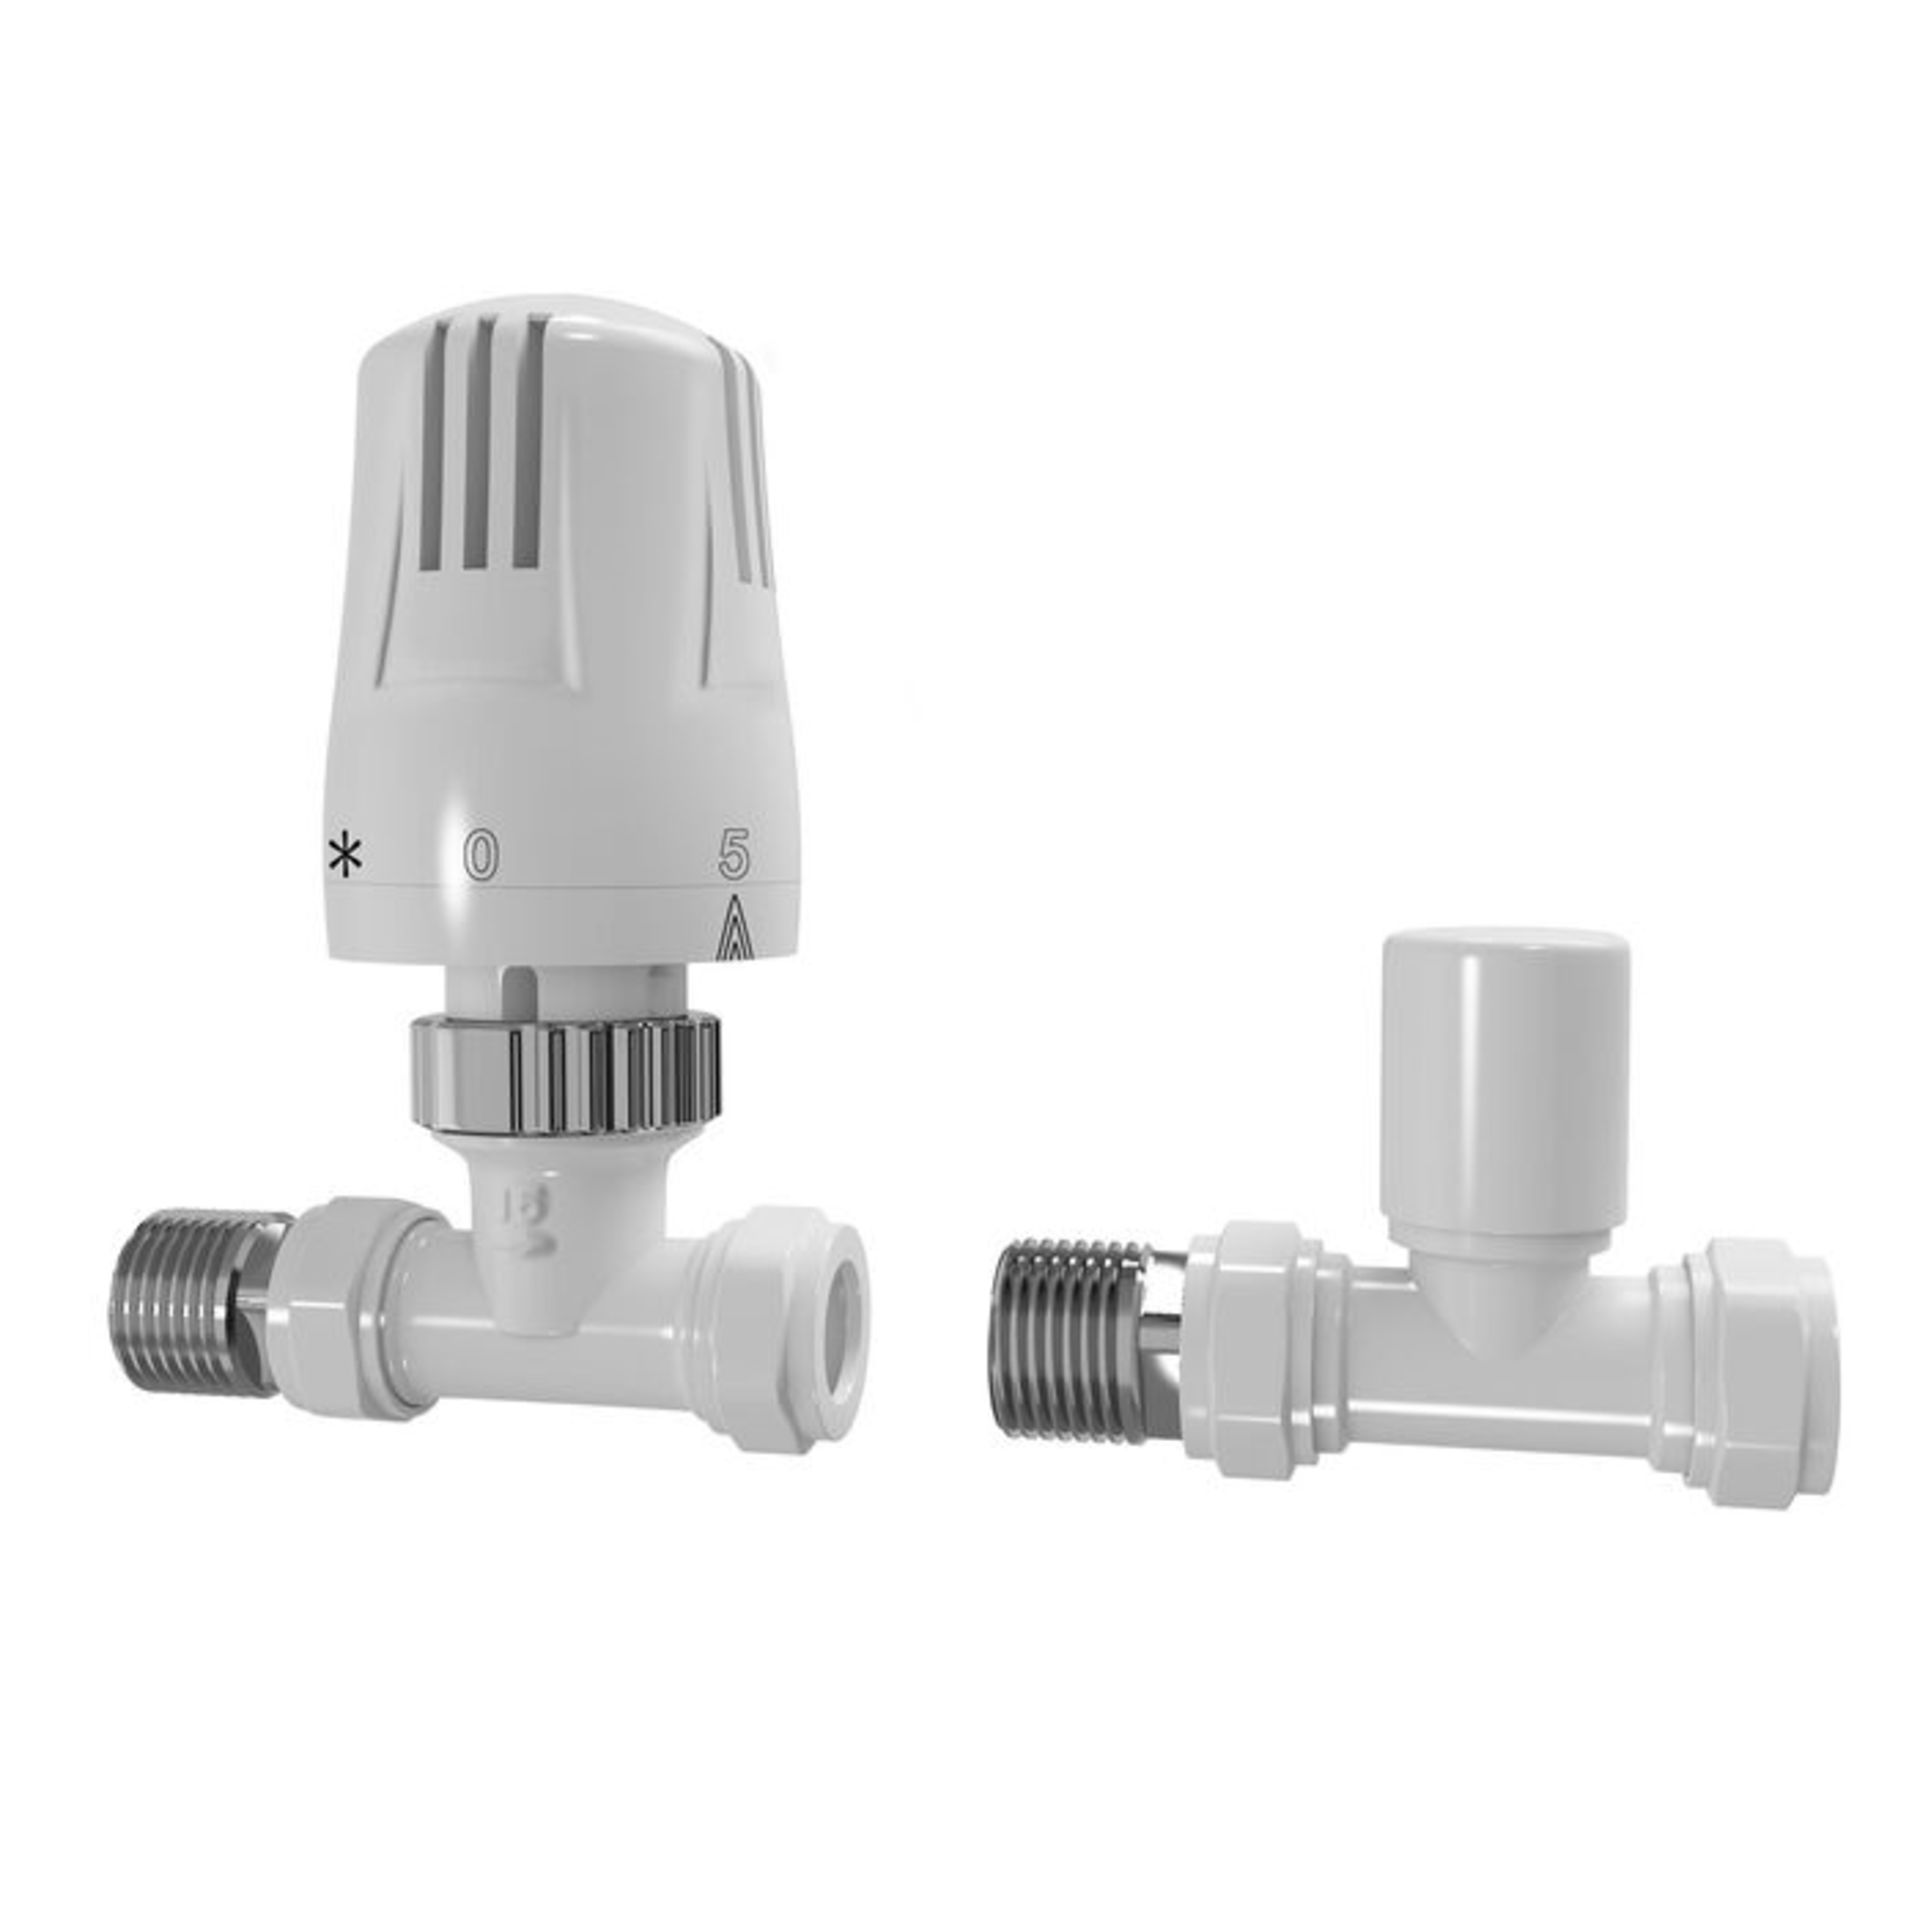 (AA1002) 15mm Standard Connection Thermostatic Straight Gloss White Radiator Valves Solid bras... - Image 2 of 3